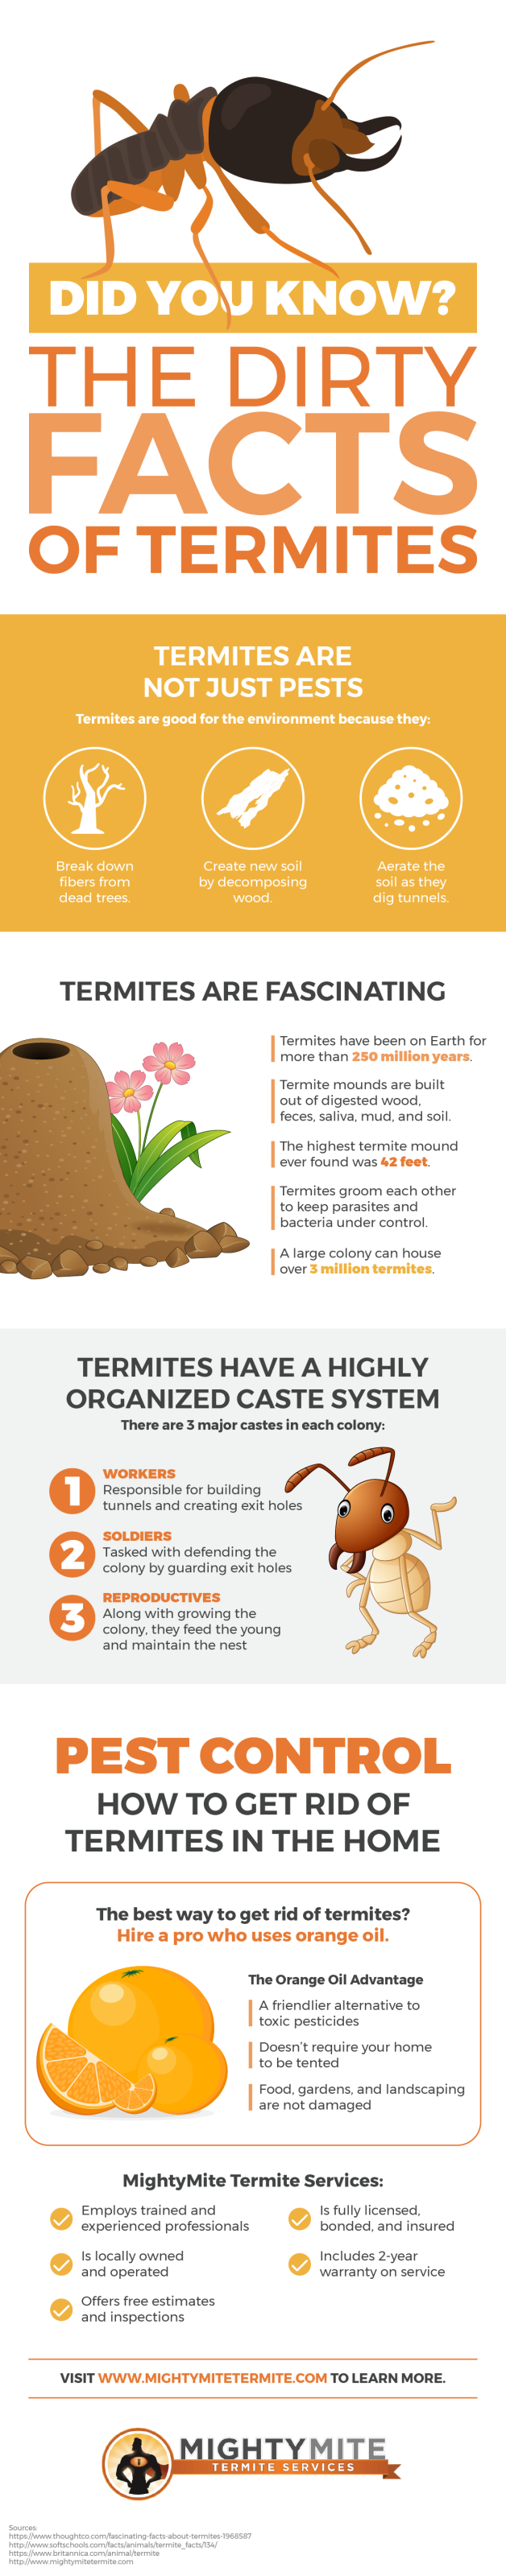 The dirty facts of termites